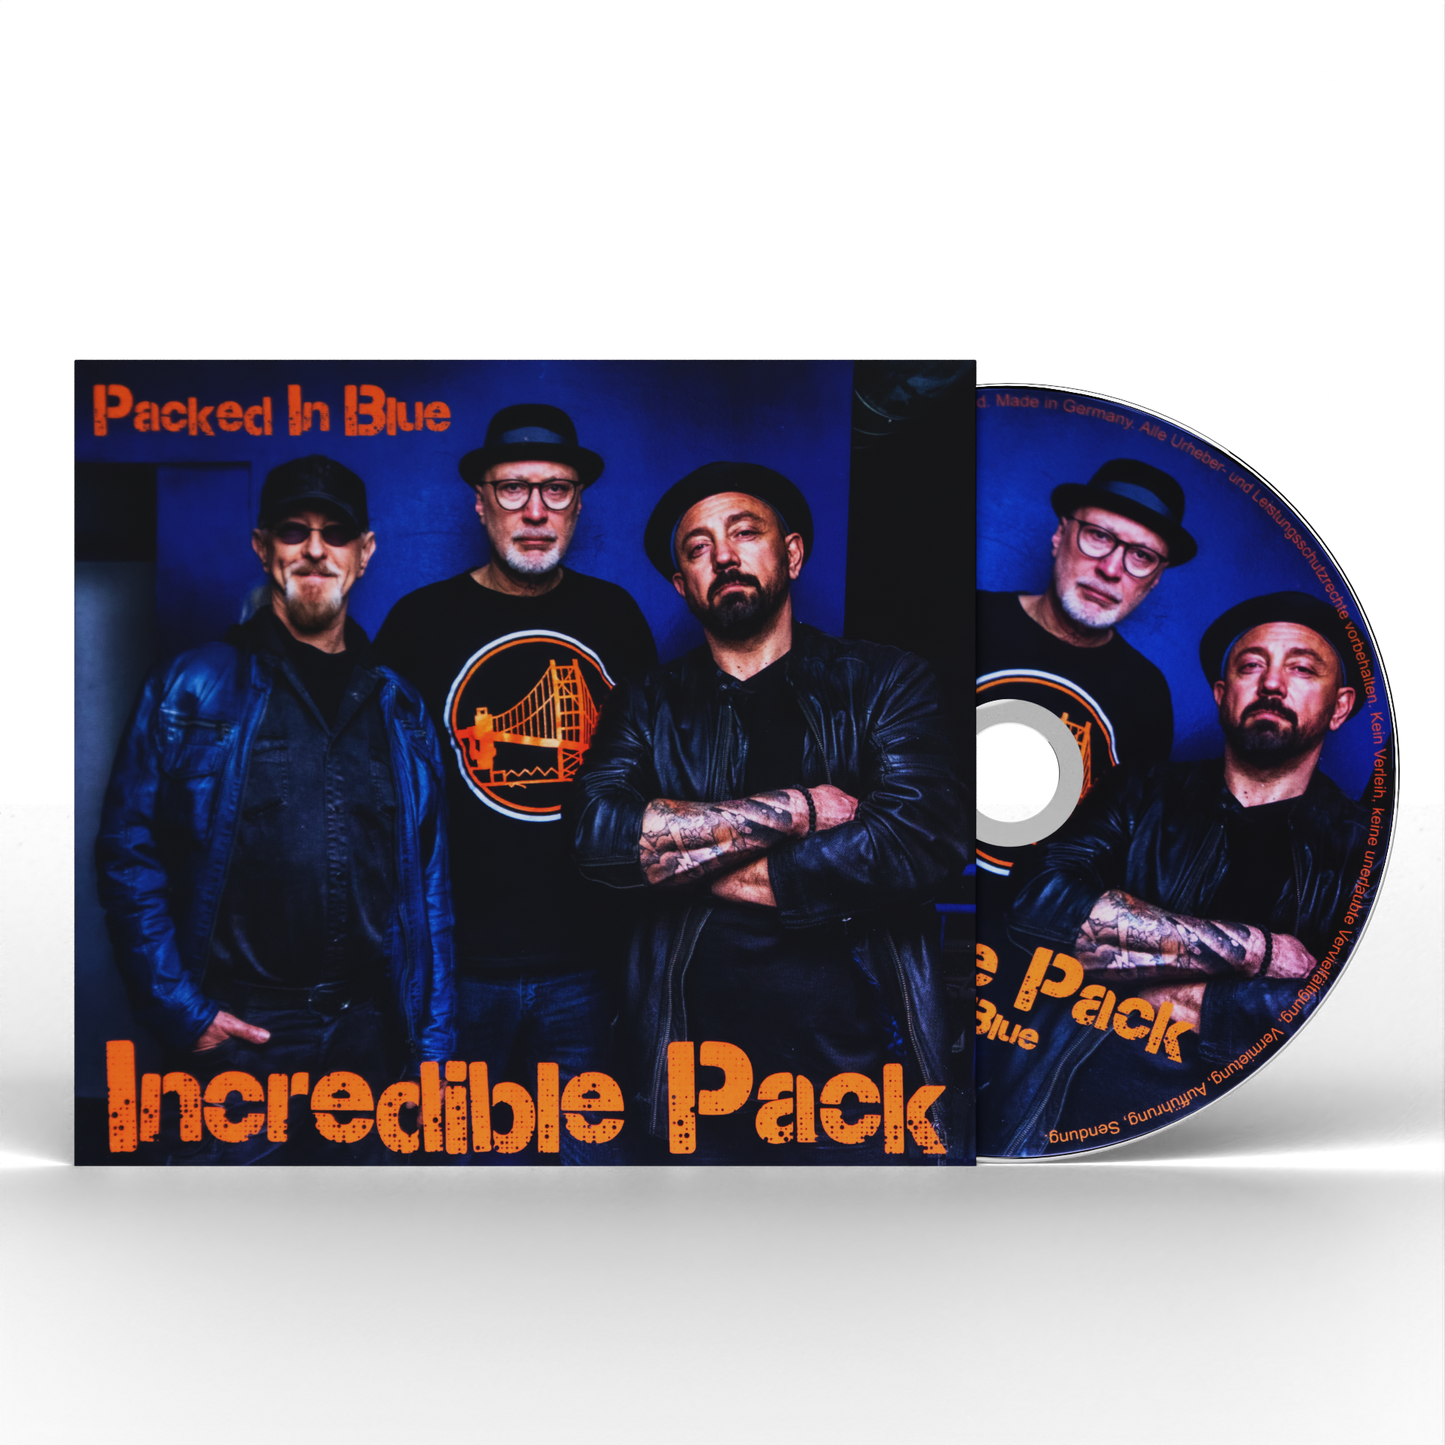 Incredible Pack - Packed In Blue, CD